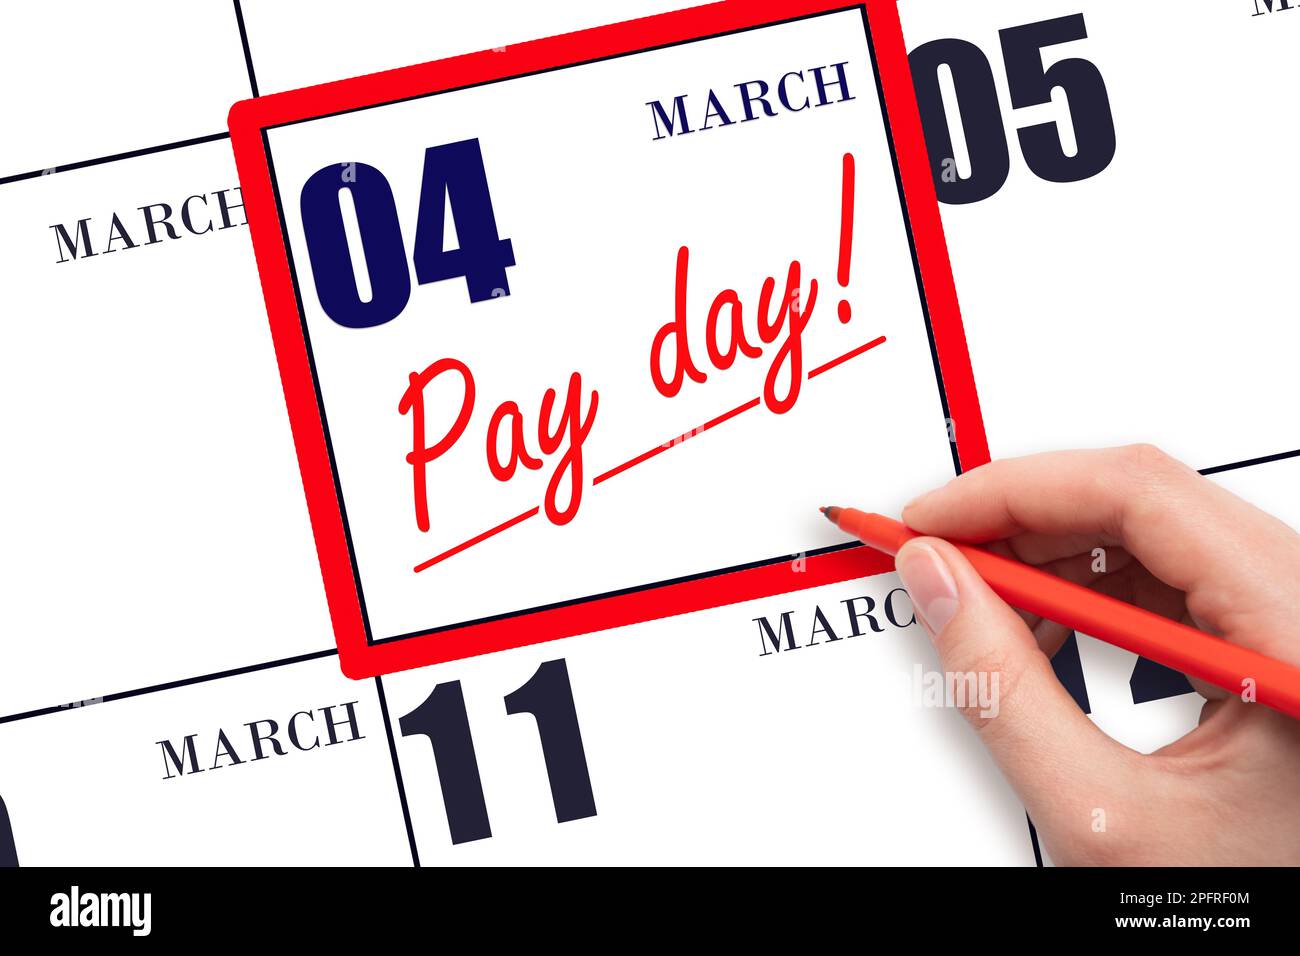 4th day of March. Hand writing text PAY DATE on calendar date March 4 and underline it. Payment due date.  Reminder concept of payment. Spring month, Stock Photo